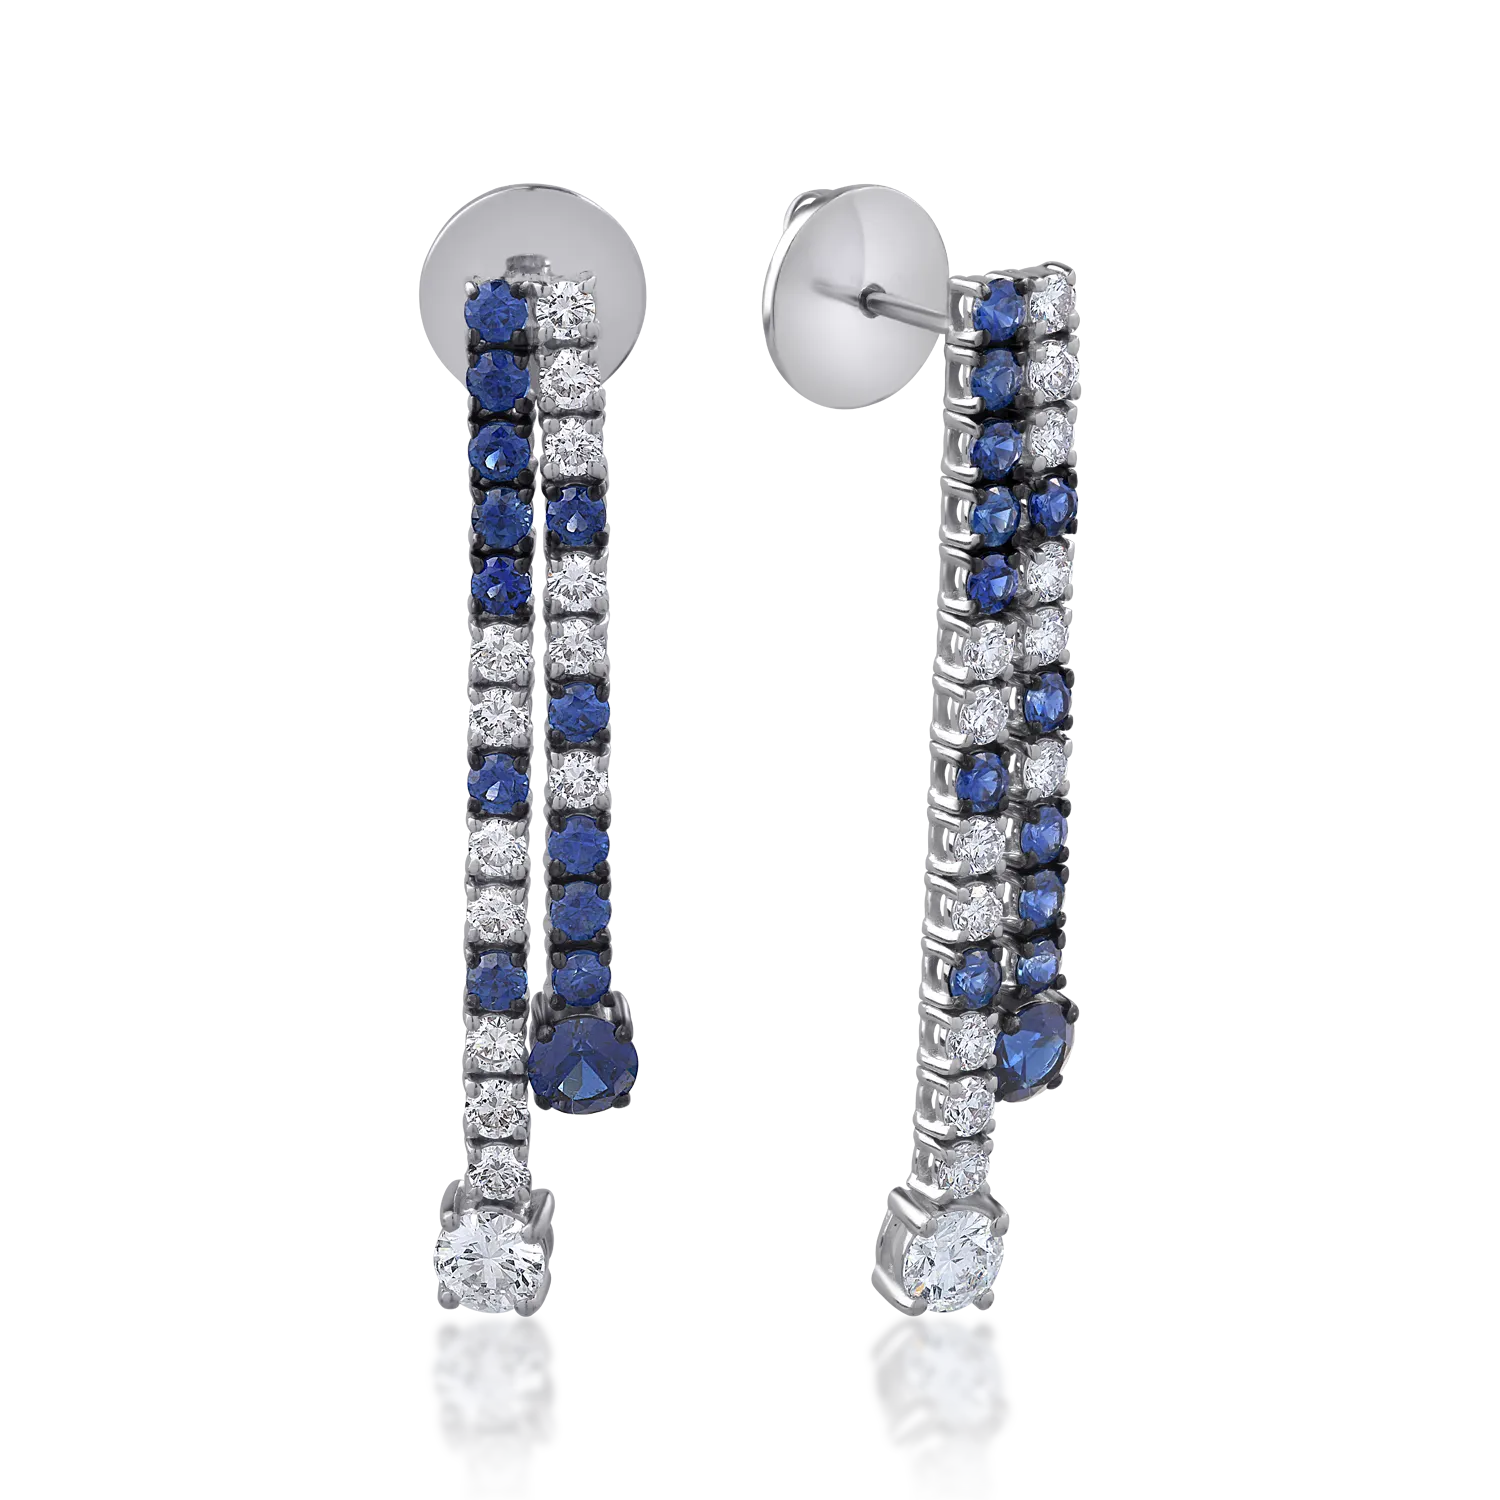 18K white gold earrings with 1.84ct sapphires and 1.4ct diamonds